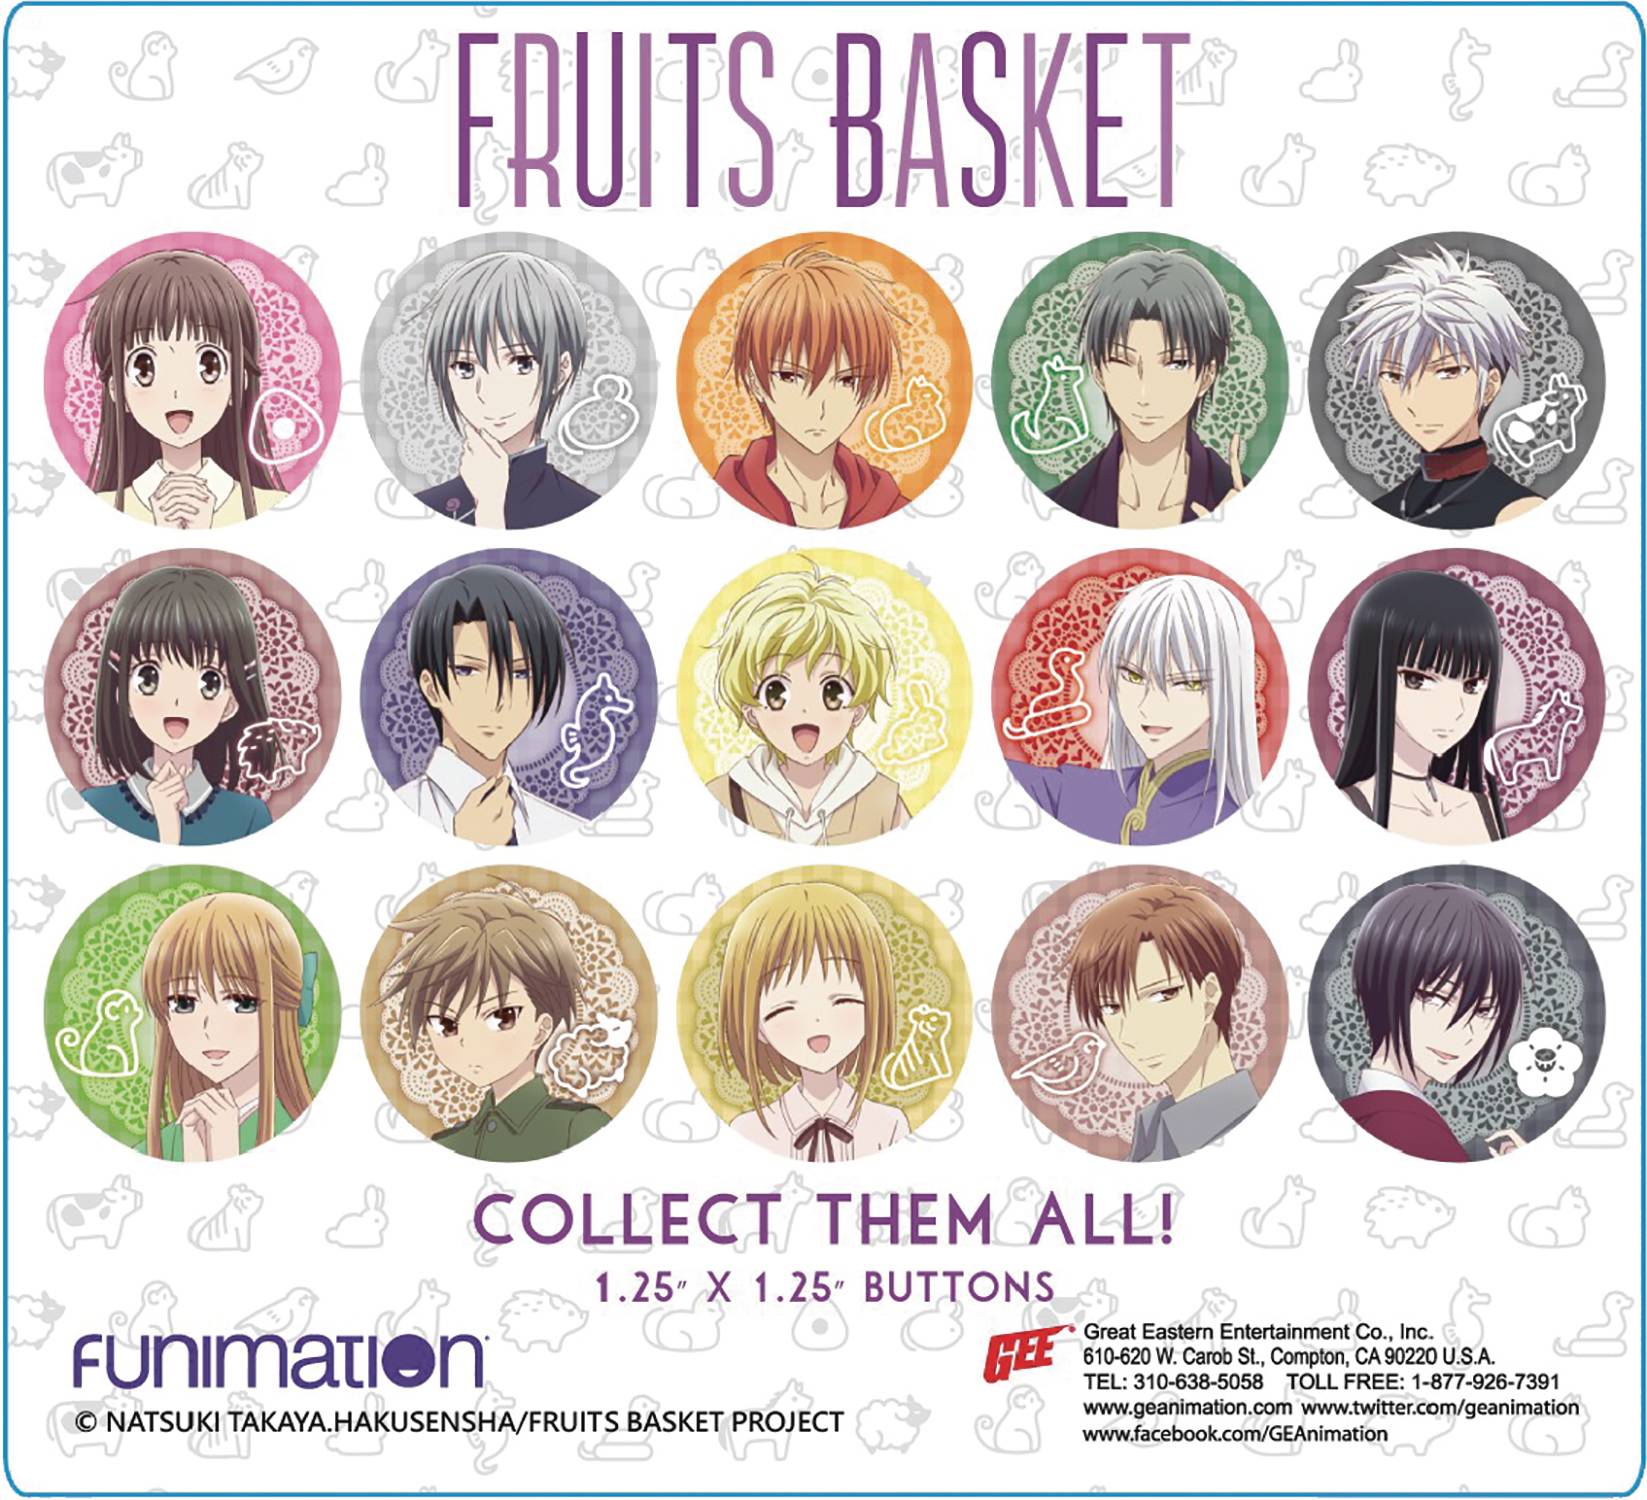 Fruits Basket Season 2 Review - The Game of Nerds